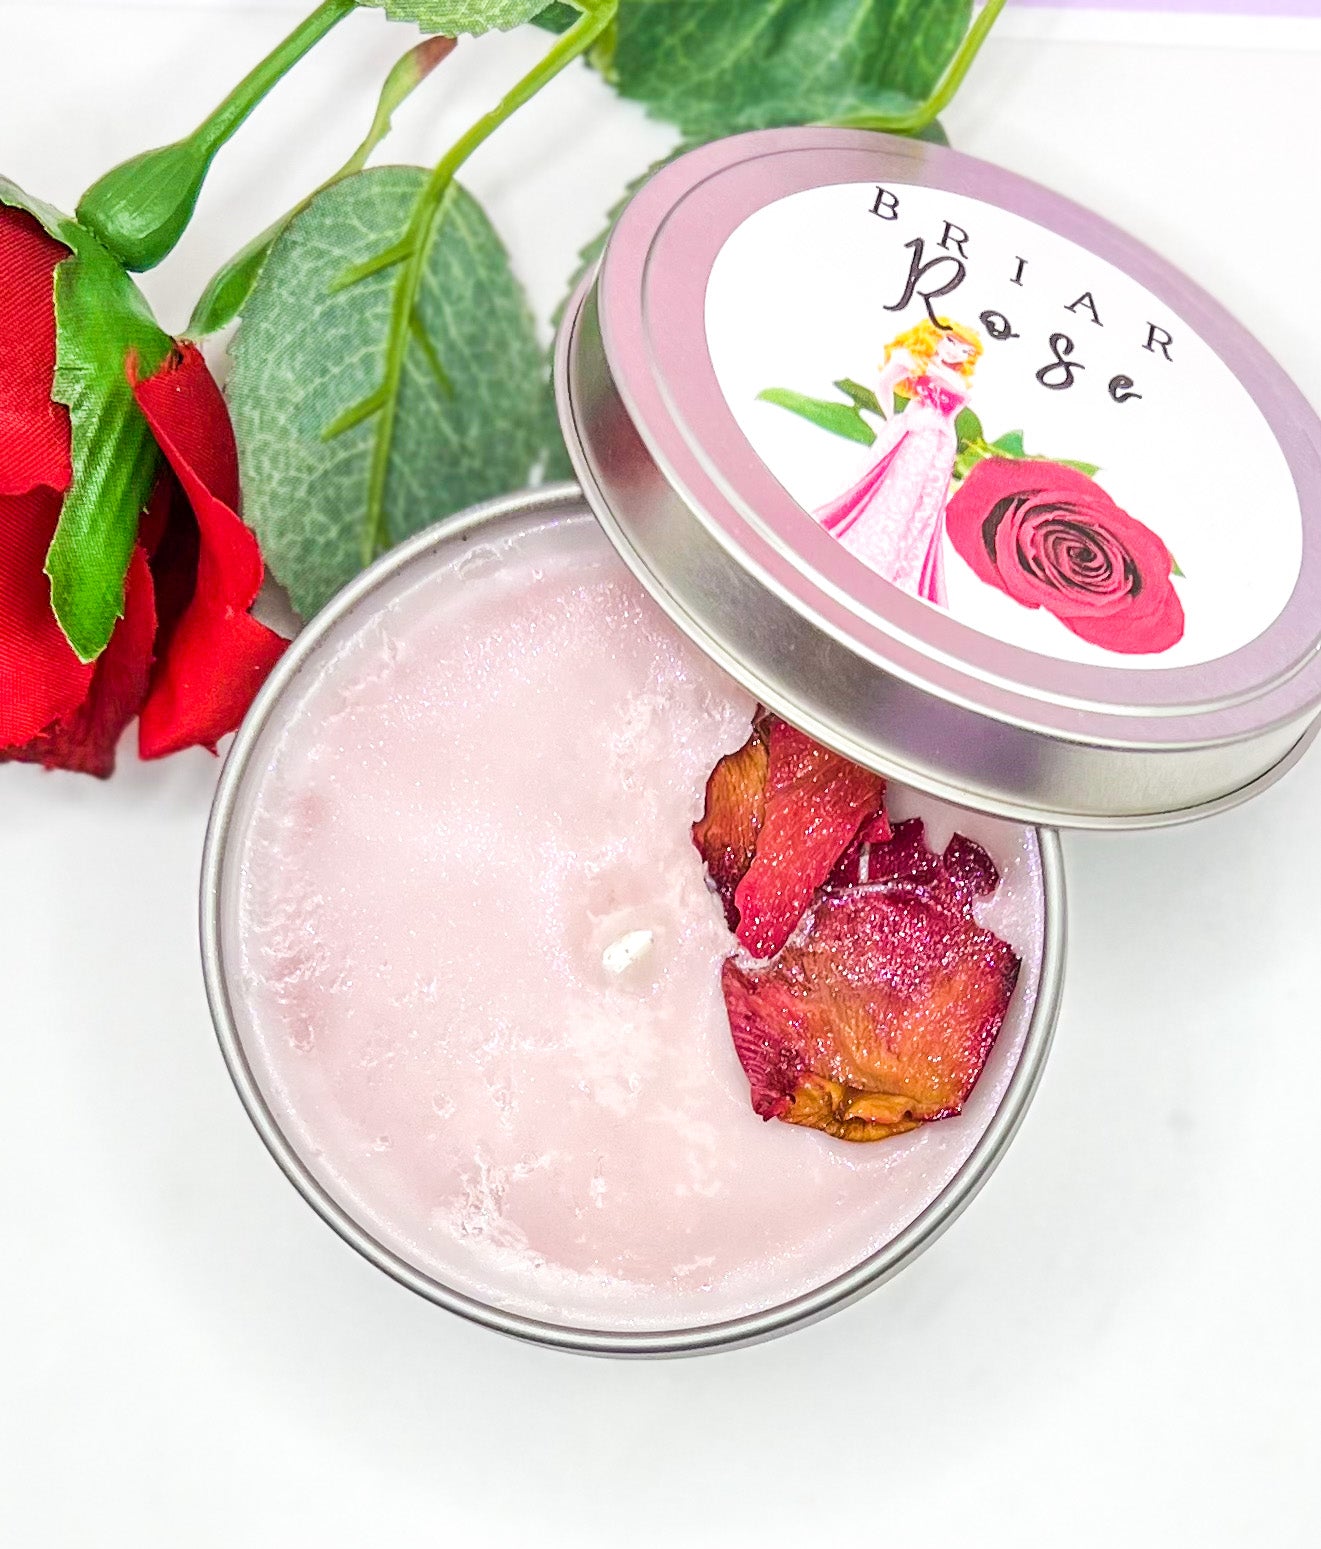 Briar Rose-Sleeping Beauty Soy Wax Candle